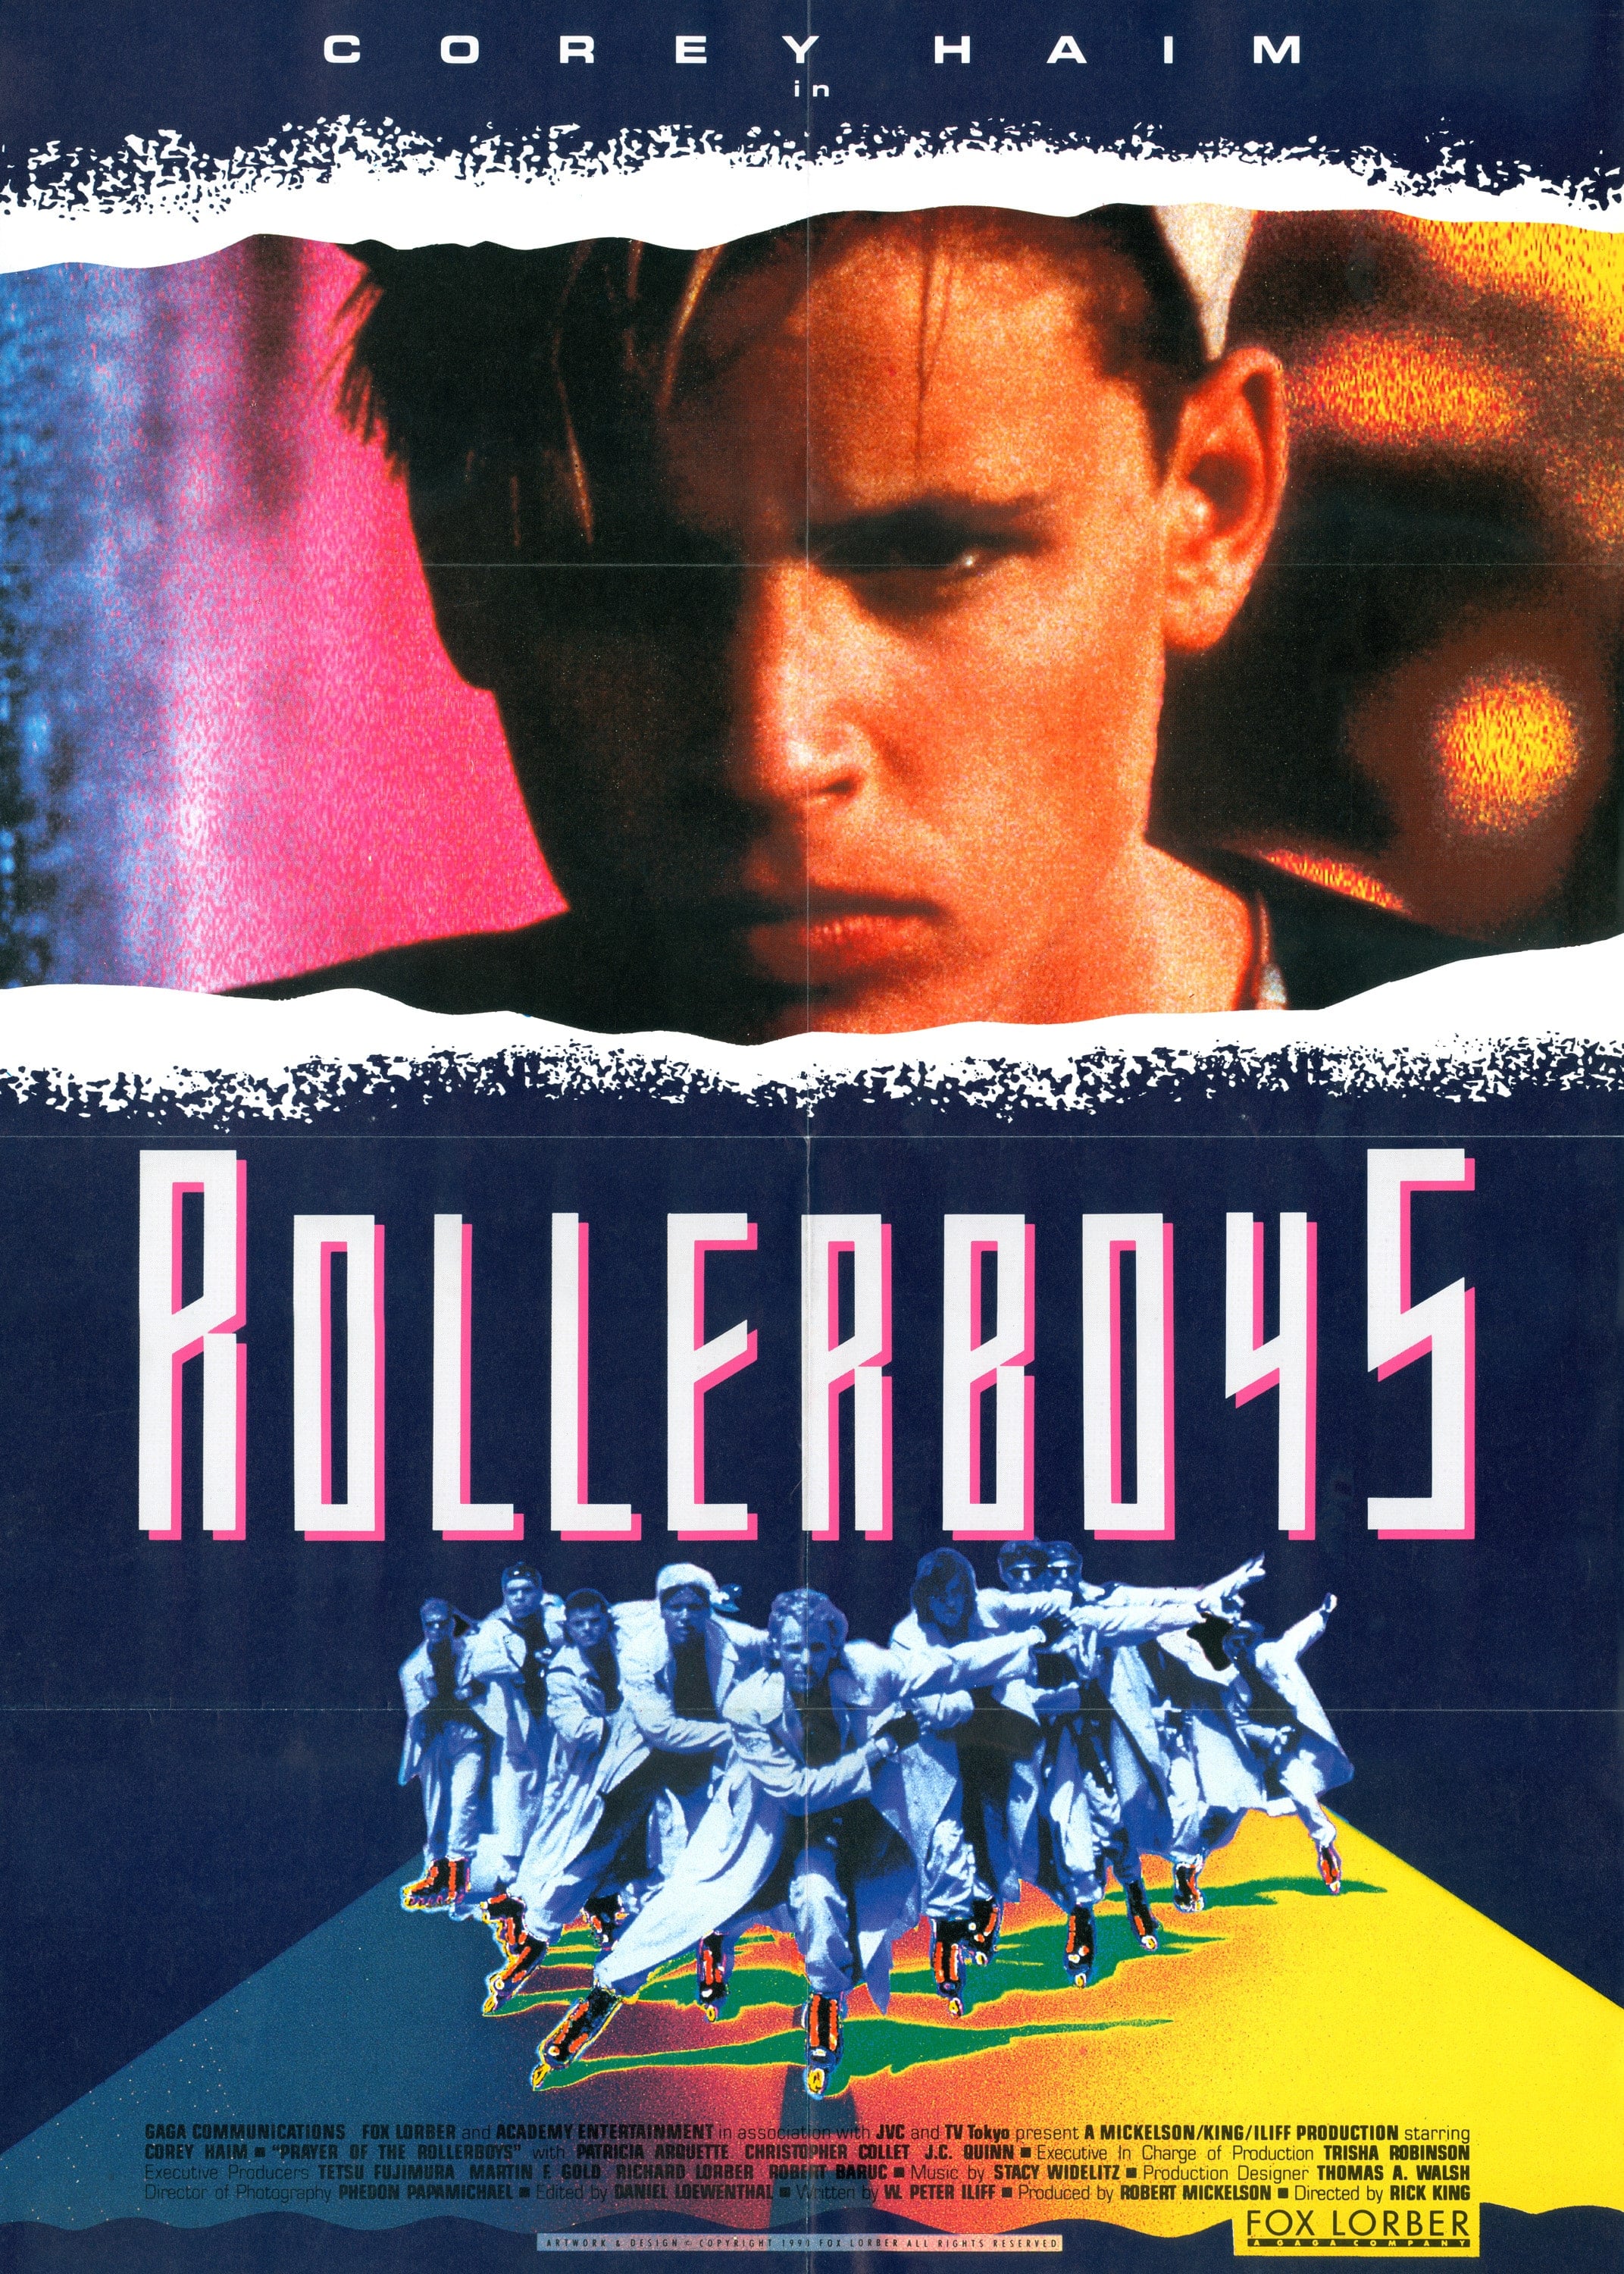 A promotional movie poster for Prayer of the Rollerboys. This one is primarily blue, with Corey Haim at the top staring intensely at the camera, and the titular Rollerboy gang skating toward the viewer with green shadows on an intense yellow, orange, and teal blue gradient road.